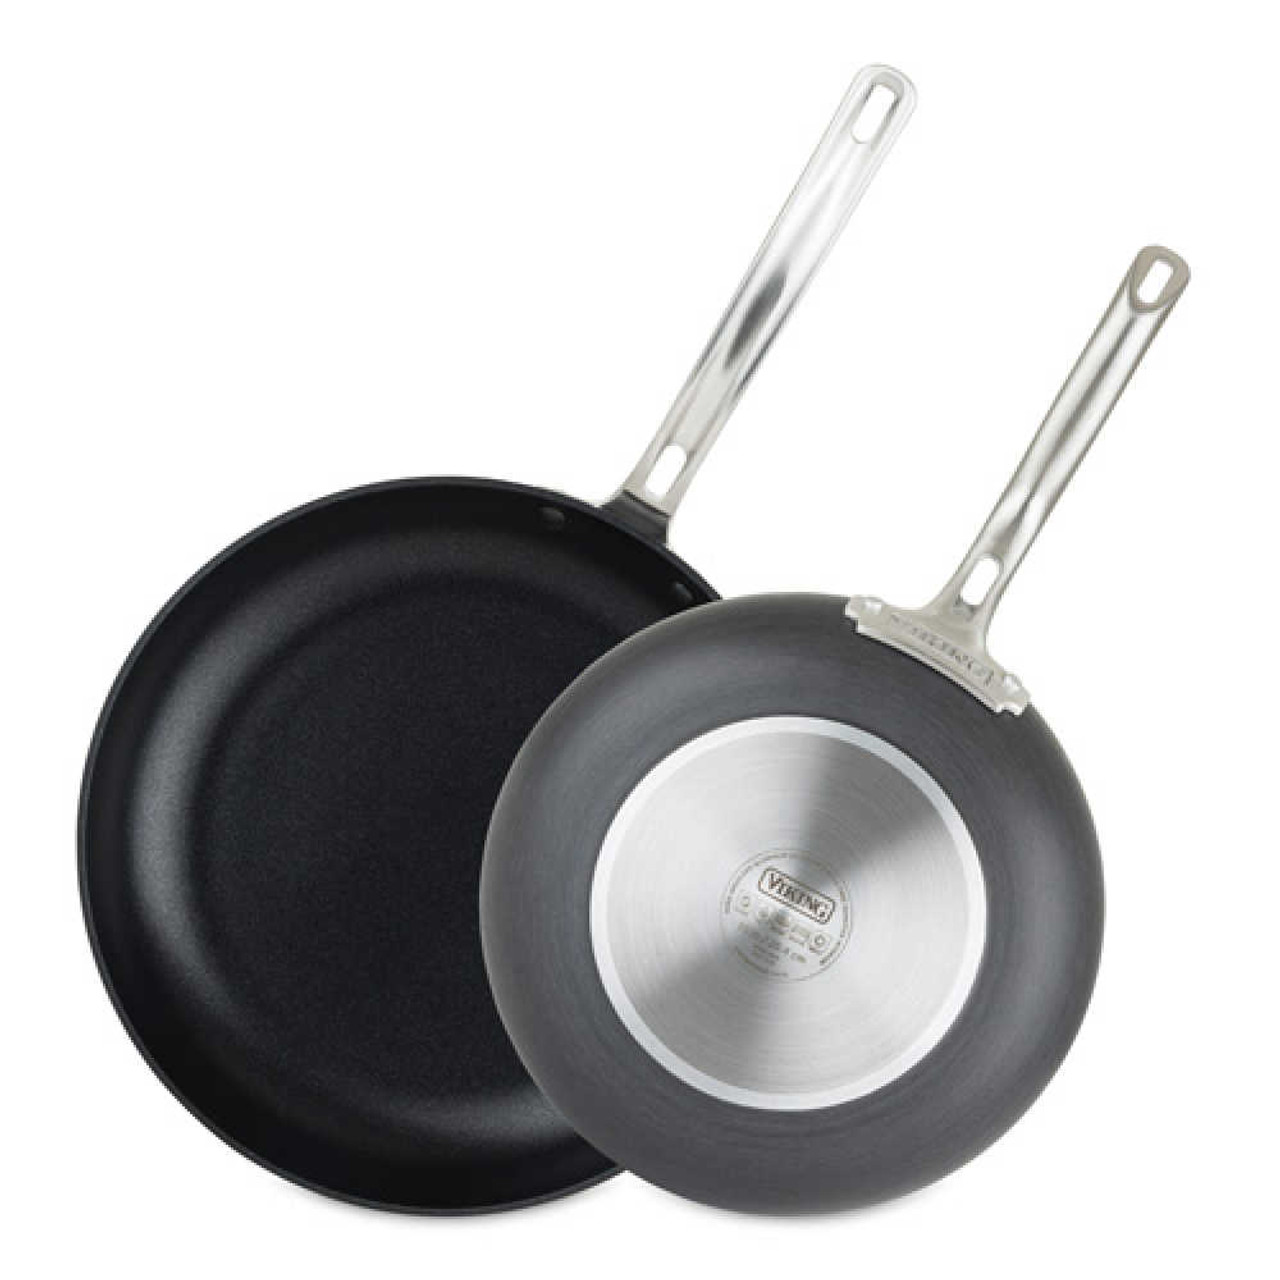 https://cdn11.bigcommerce.com/s-hccytny0od/images/stencil/1280x1280/products/4821/19669/Viking_Hard_Anodized_Nonstick_2-Piece_Fry_Pan_Set__21453.1656021149.jpg?c=2?imbypass=on